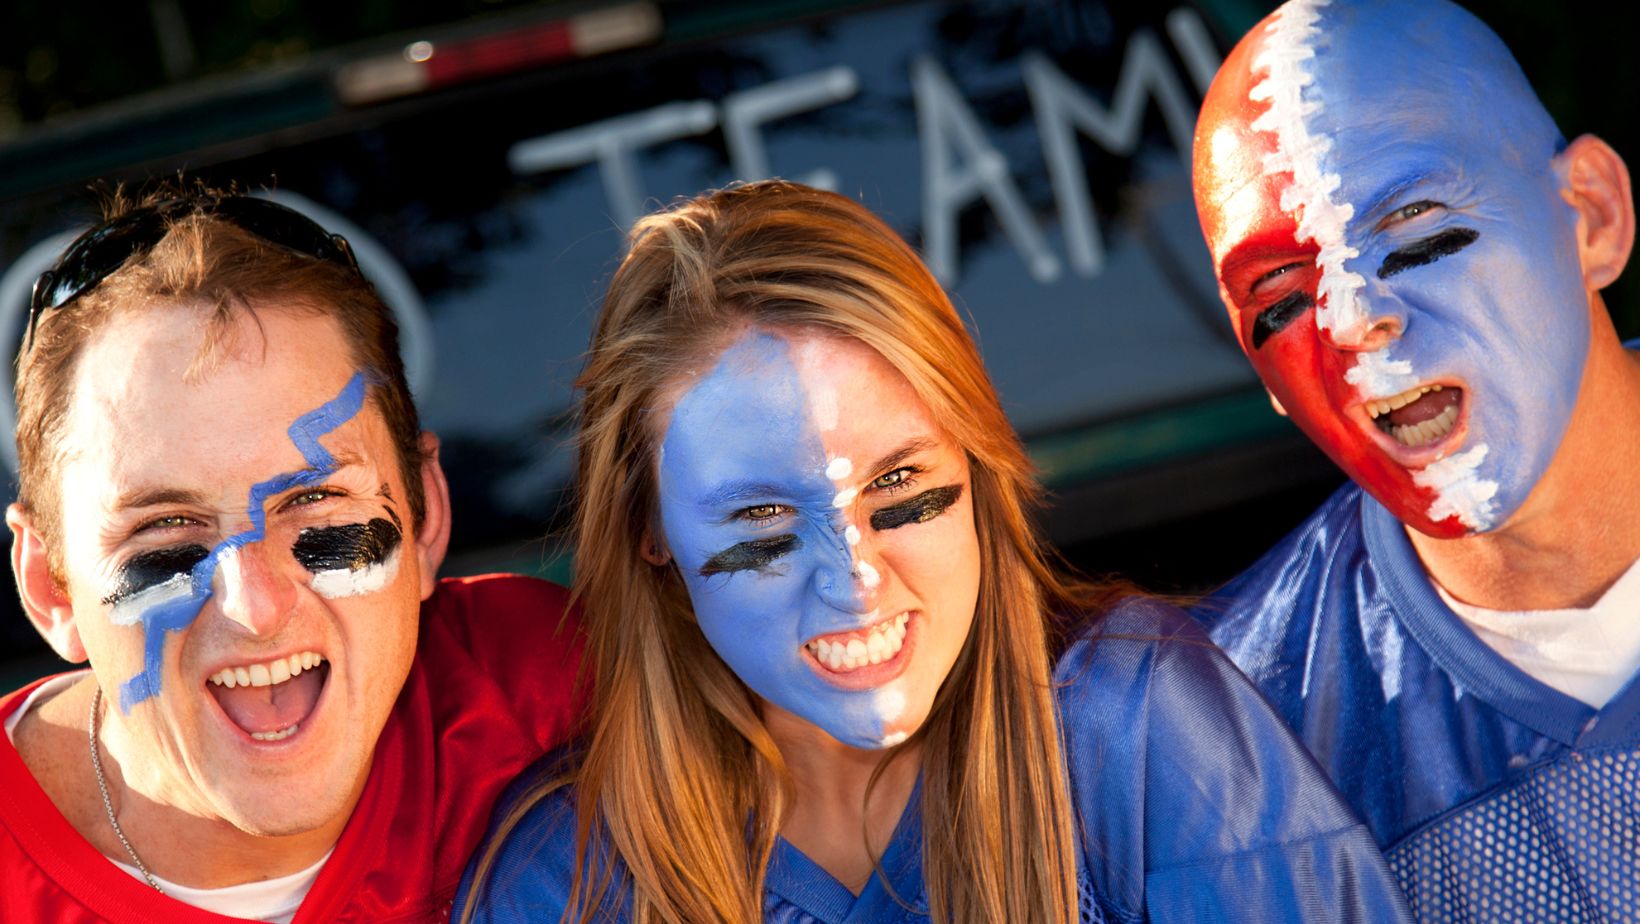 two men and a woman with blue and red face paint